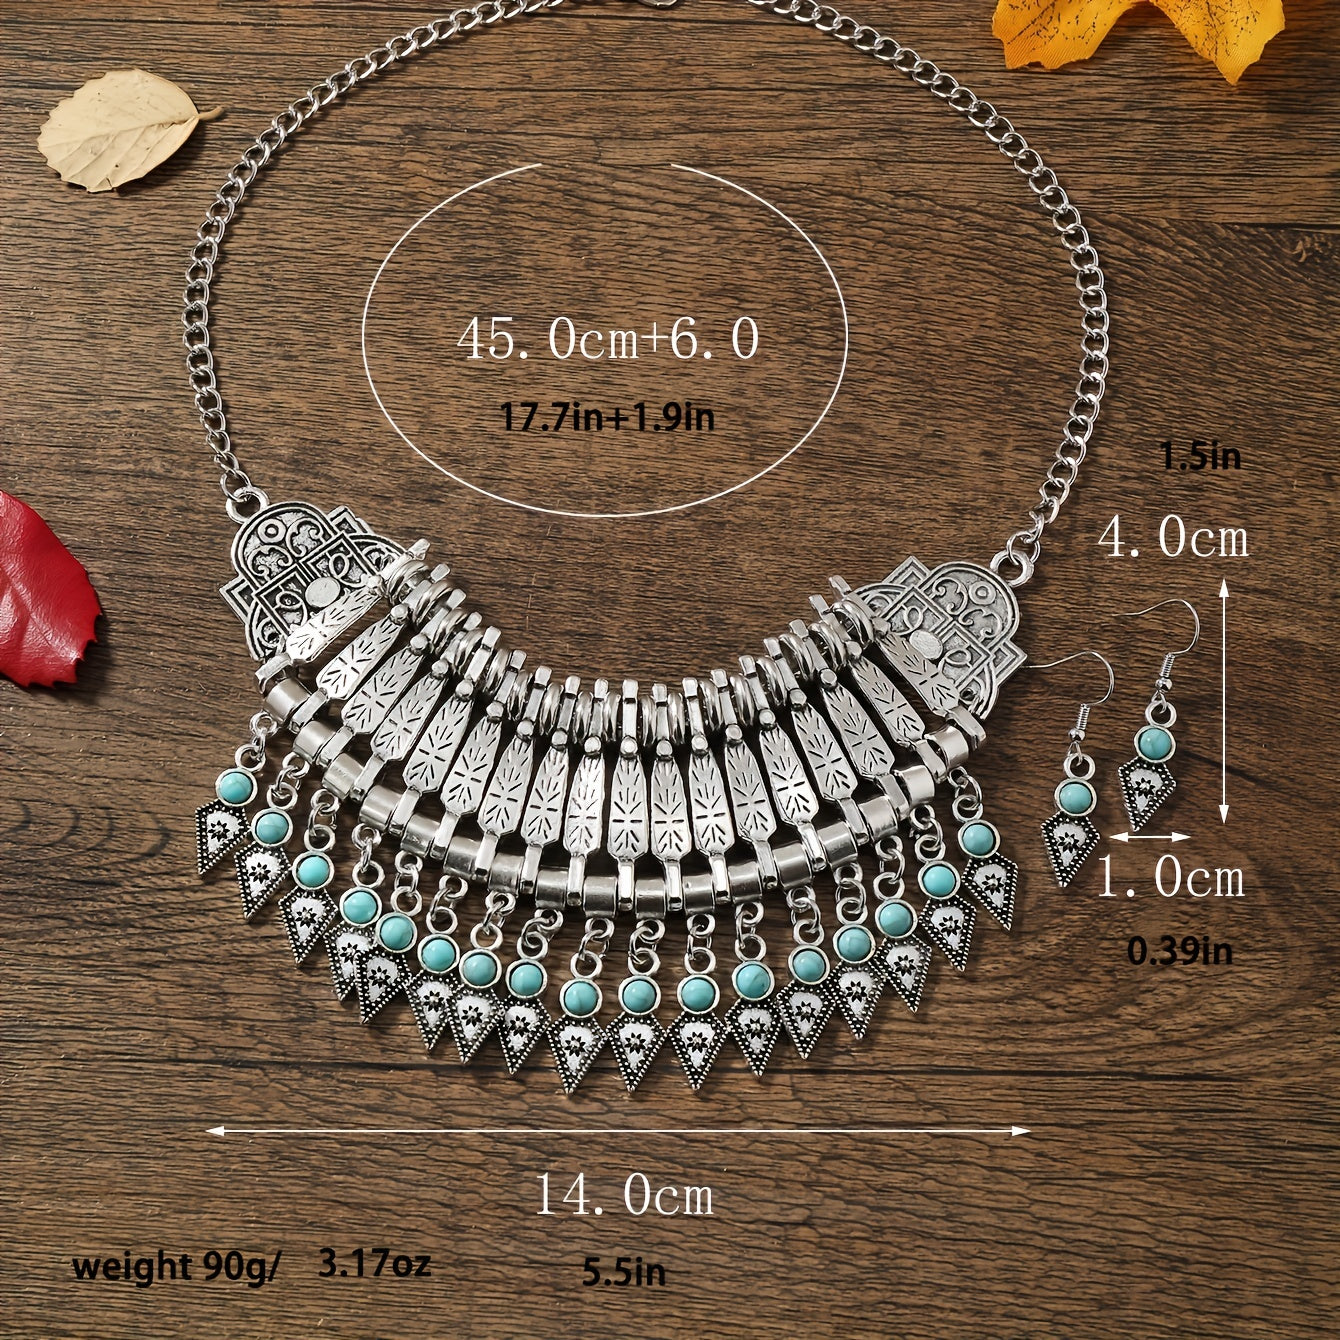 3pcs Earrings Plus Necklace Vintage Jewelry Set Traditional Music Instrument Design Special Party Accessories For Female Multi Colors To Choose